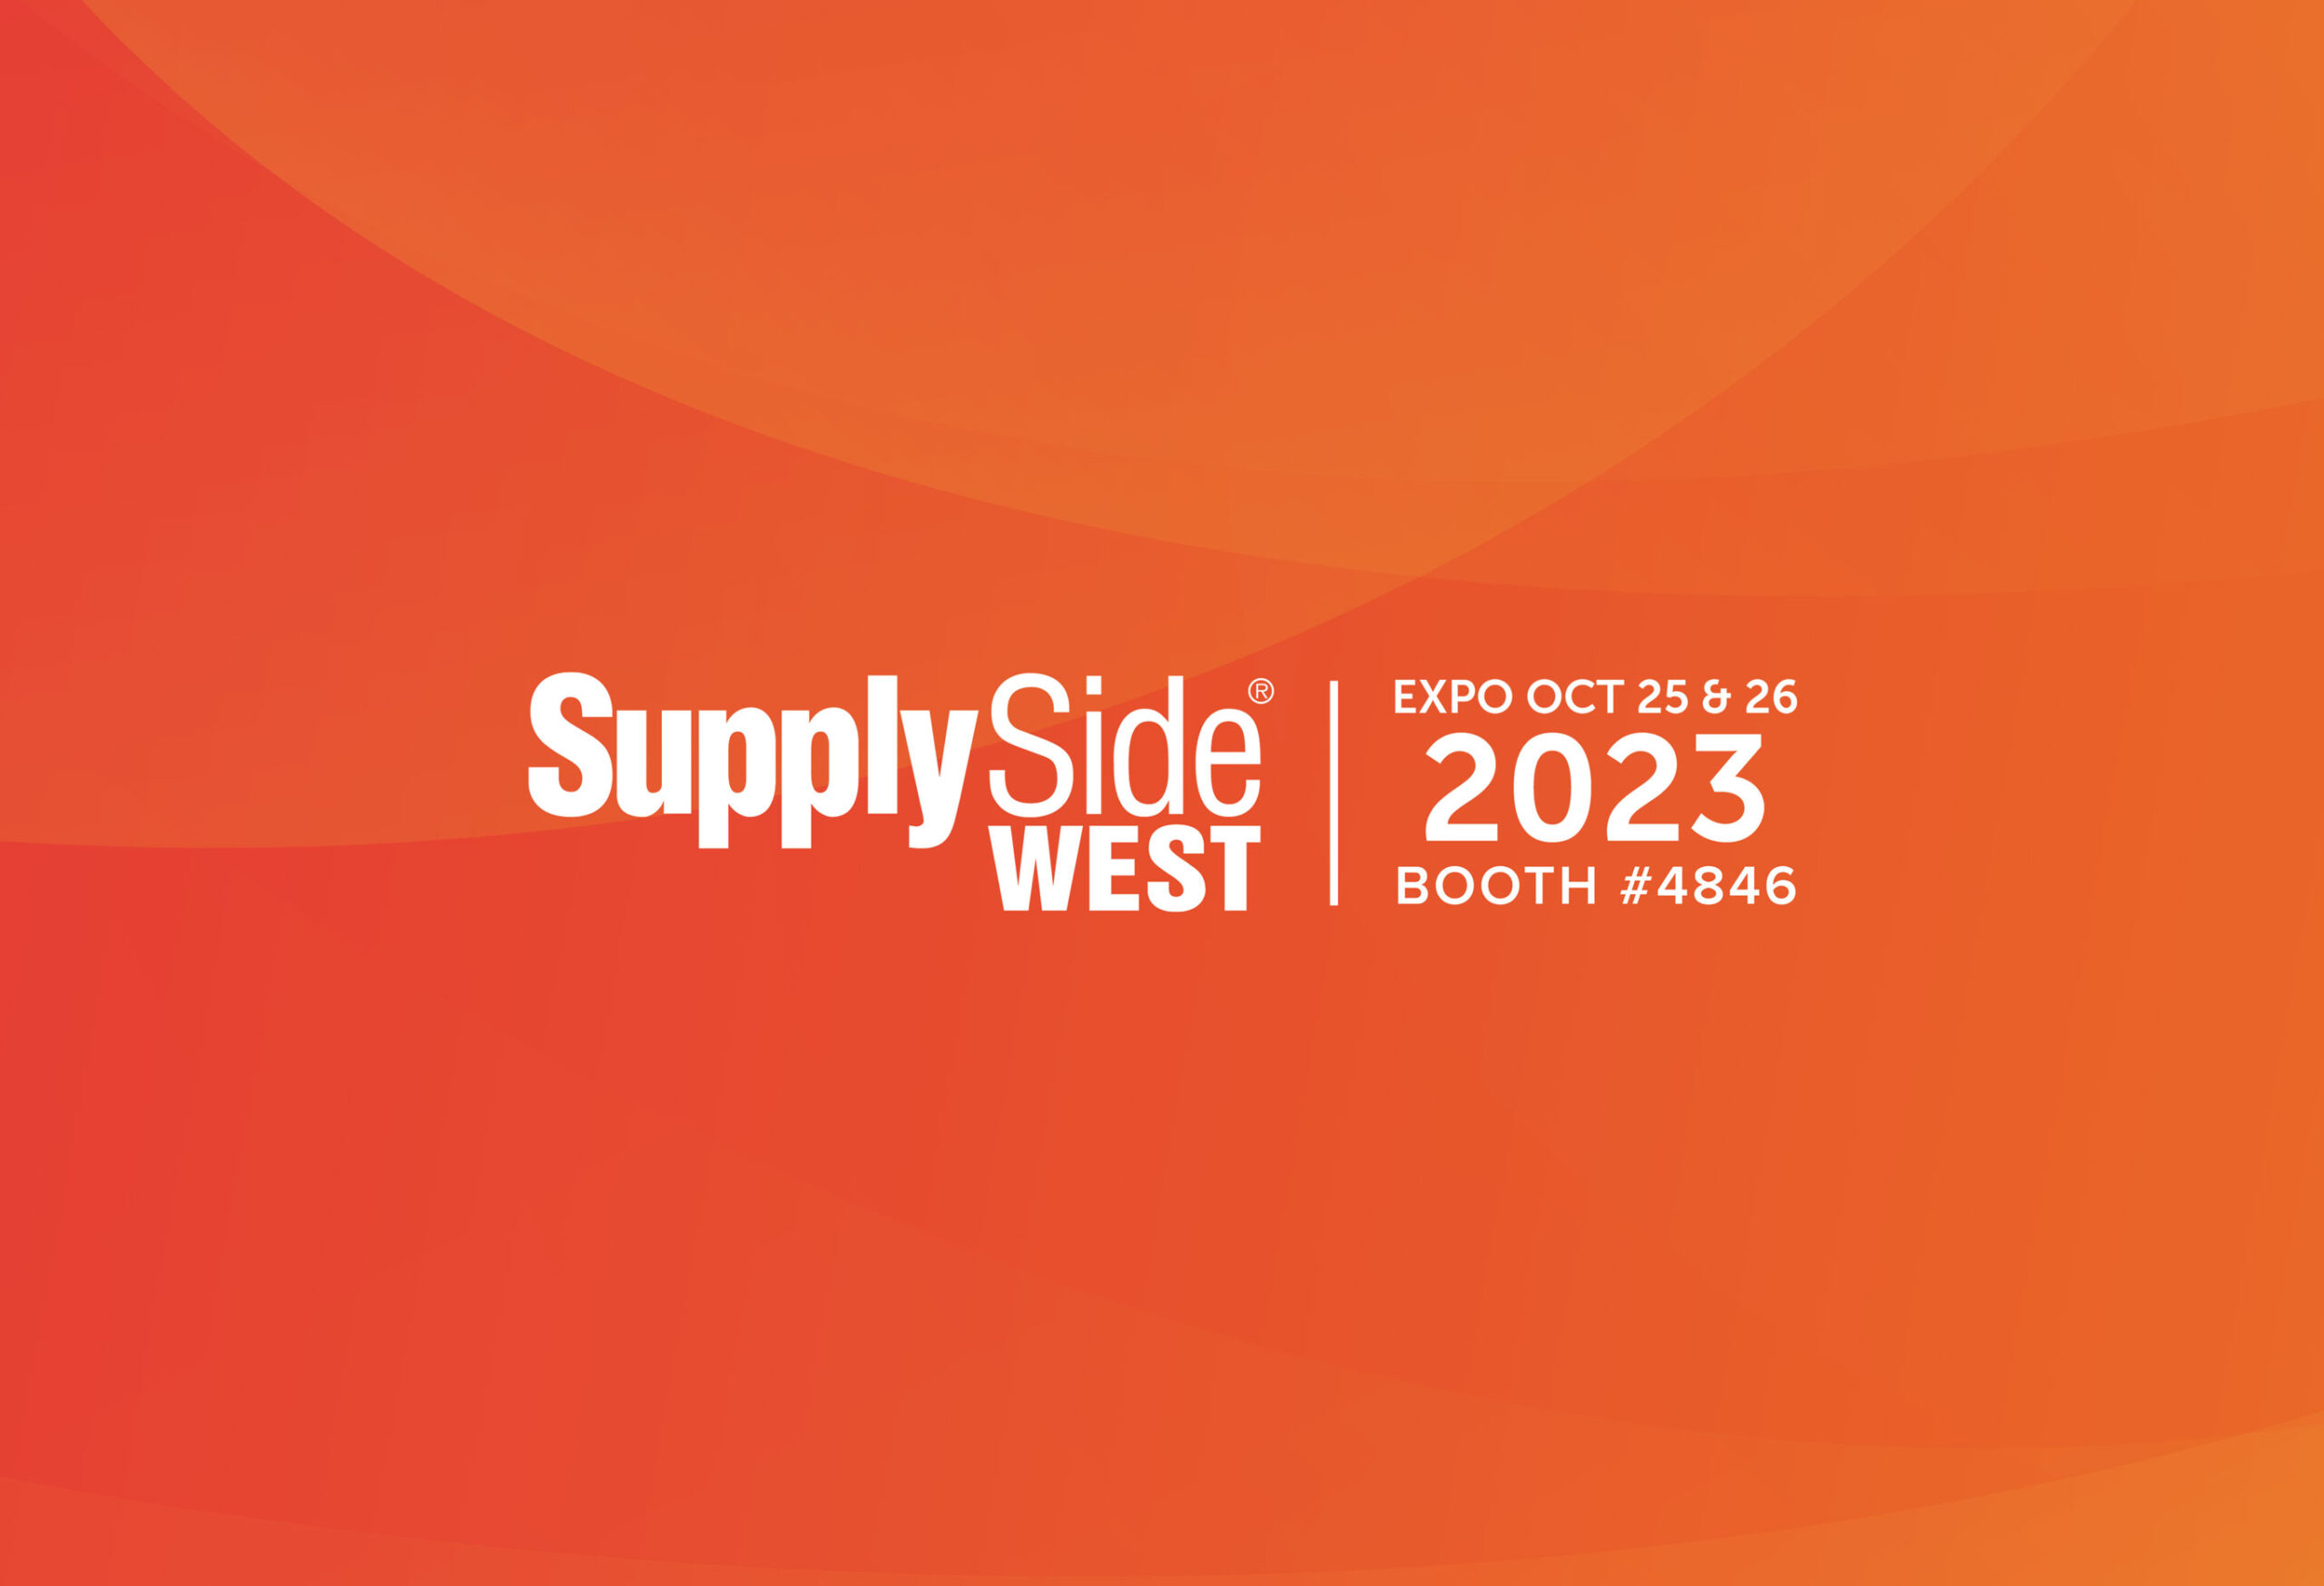 Supply Side West 2023 – Booth #4846